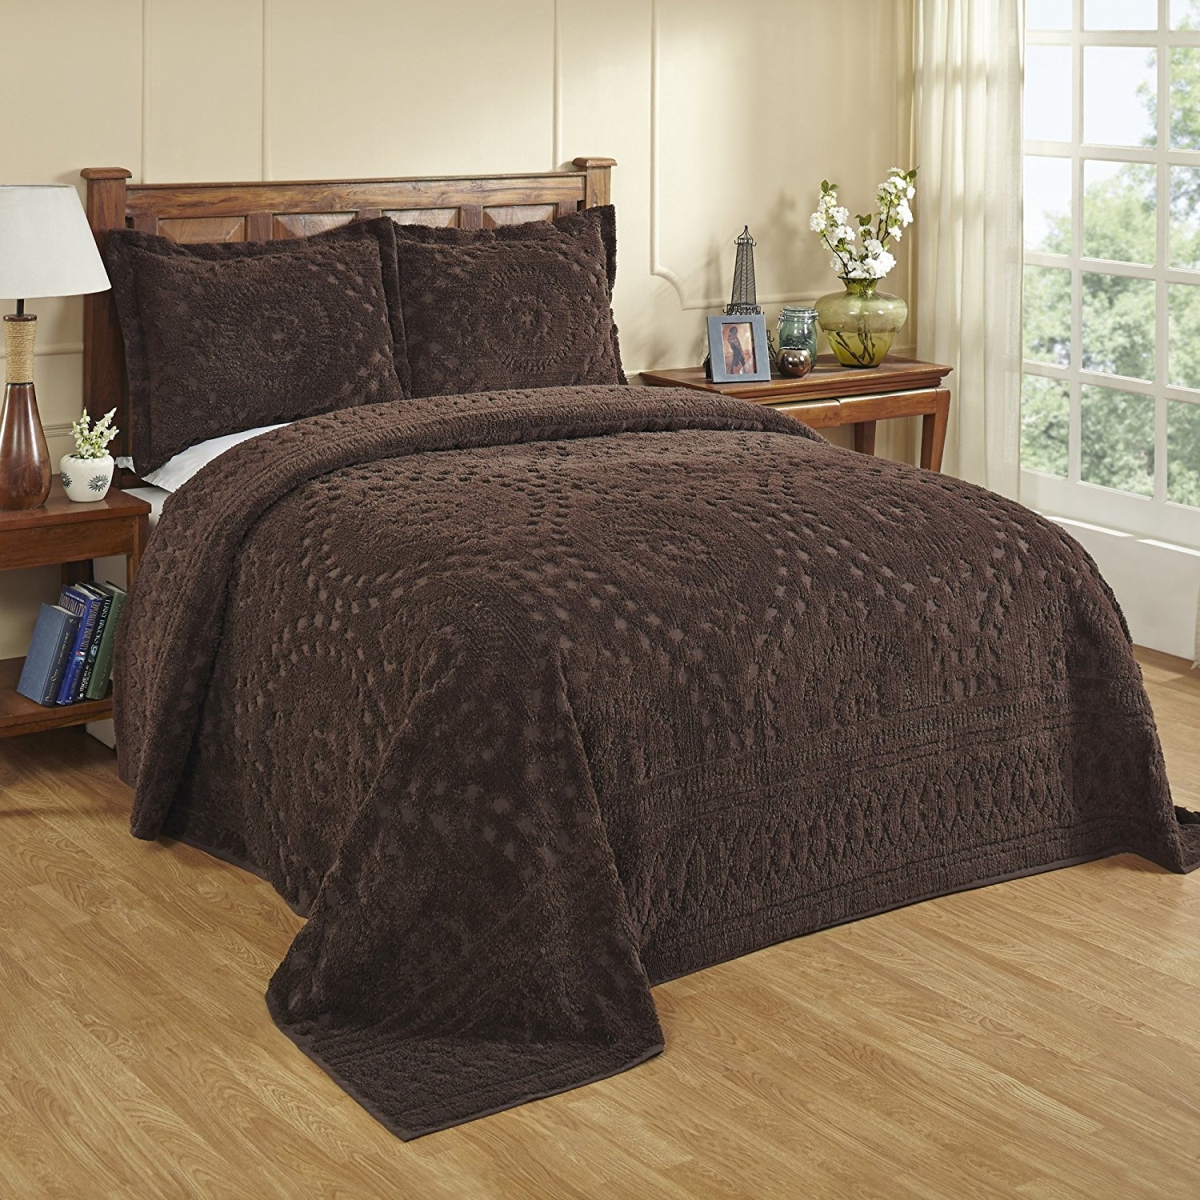 Bsrquch 102 X 110 In. Rio Chenille Bedspread, Chocolate - Queen